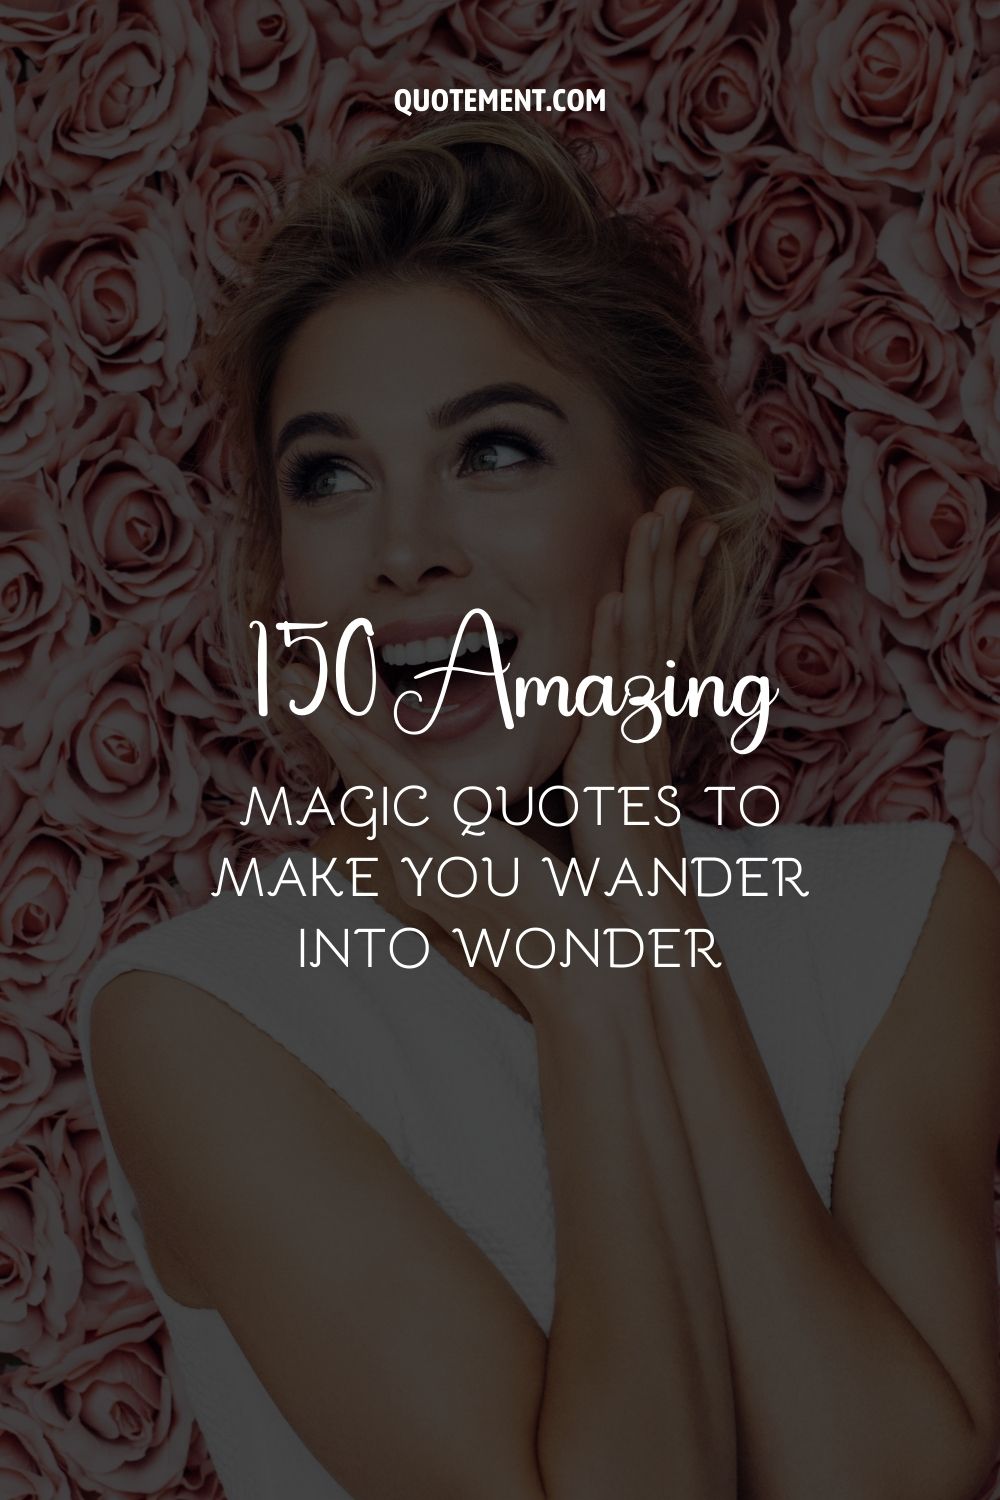 150 Amazing Magic Quotes To Make You Wander Into Wonder